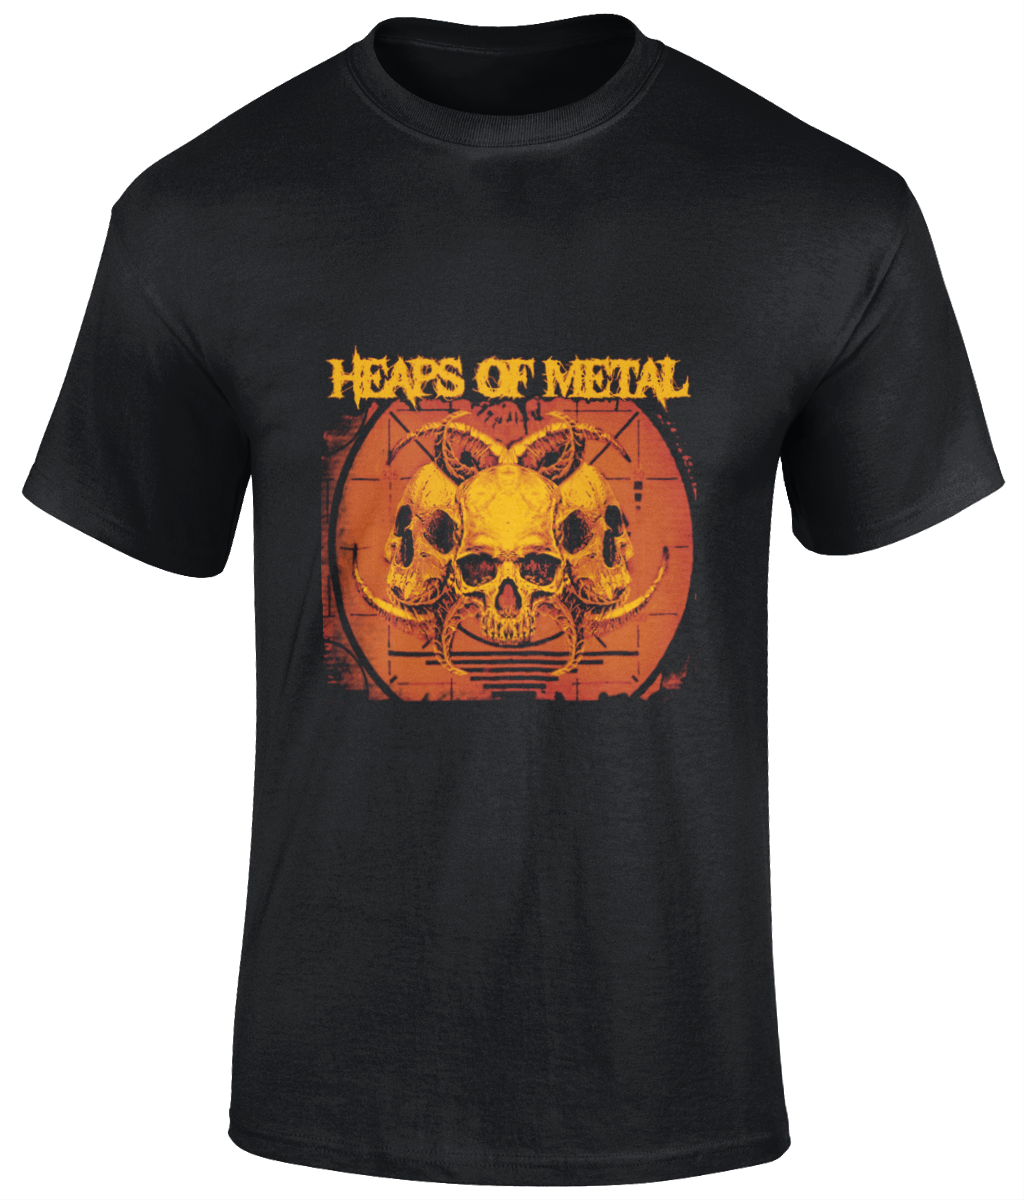 POISON VALLEY CLOTHING "HEAPS OF METAL ARTWORK" in orange on black unisex t shirt  Material: 100% cotton.  Seamless twin needle collar. Taped neck and shoulders. Tubular body. Twin needle sleeves and hem. Sizes small to 5XL